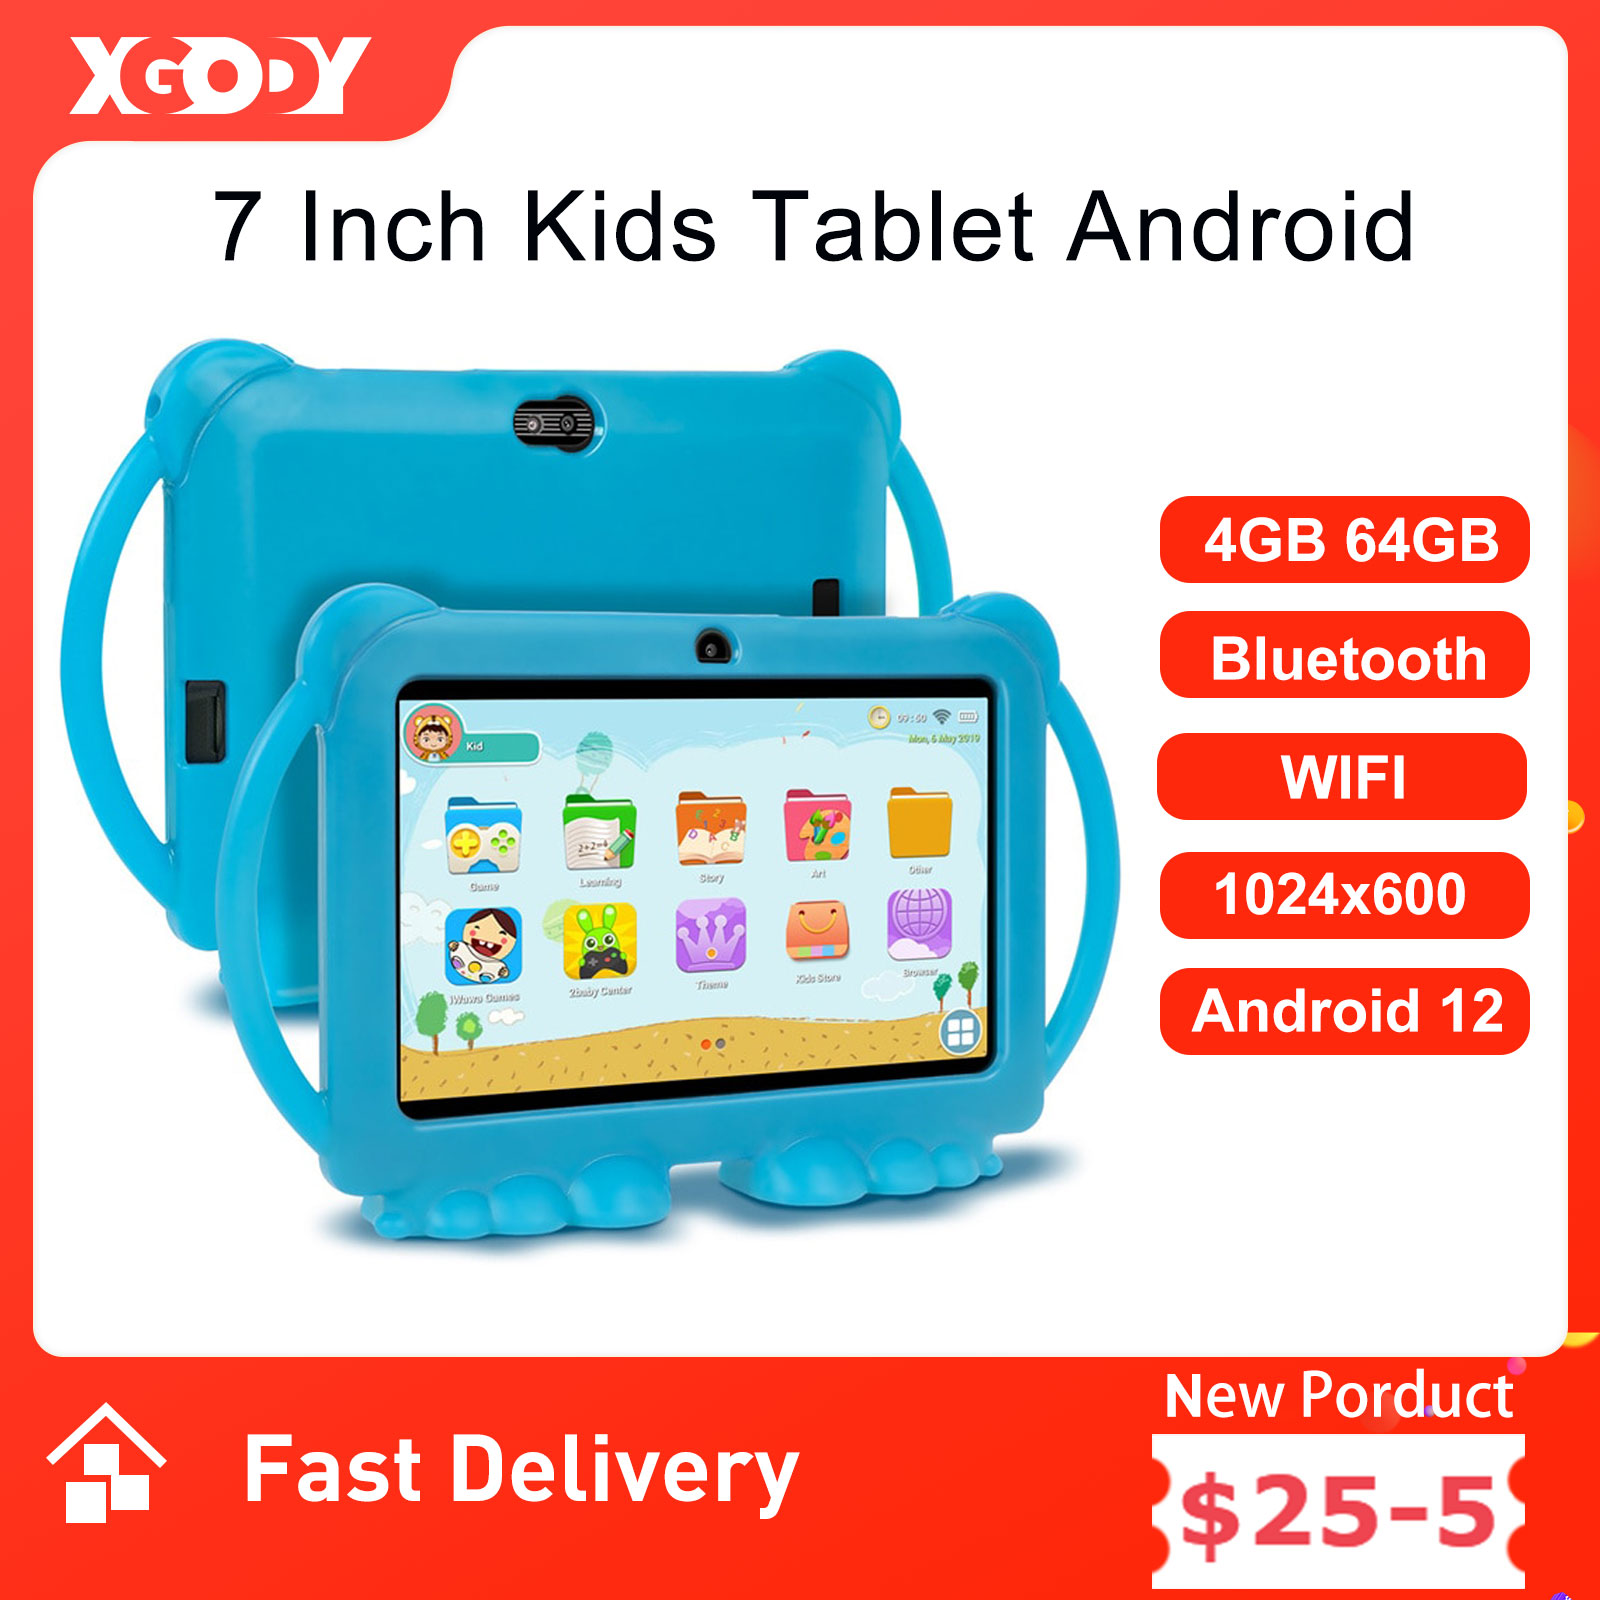 

XGODY 7 Inch Android Kids Tablet PC For Study Education 64GB ROM Quad Core WiFi OTG 1024x600 Children Tablets With Tablet Case, Red